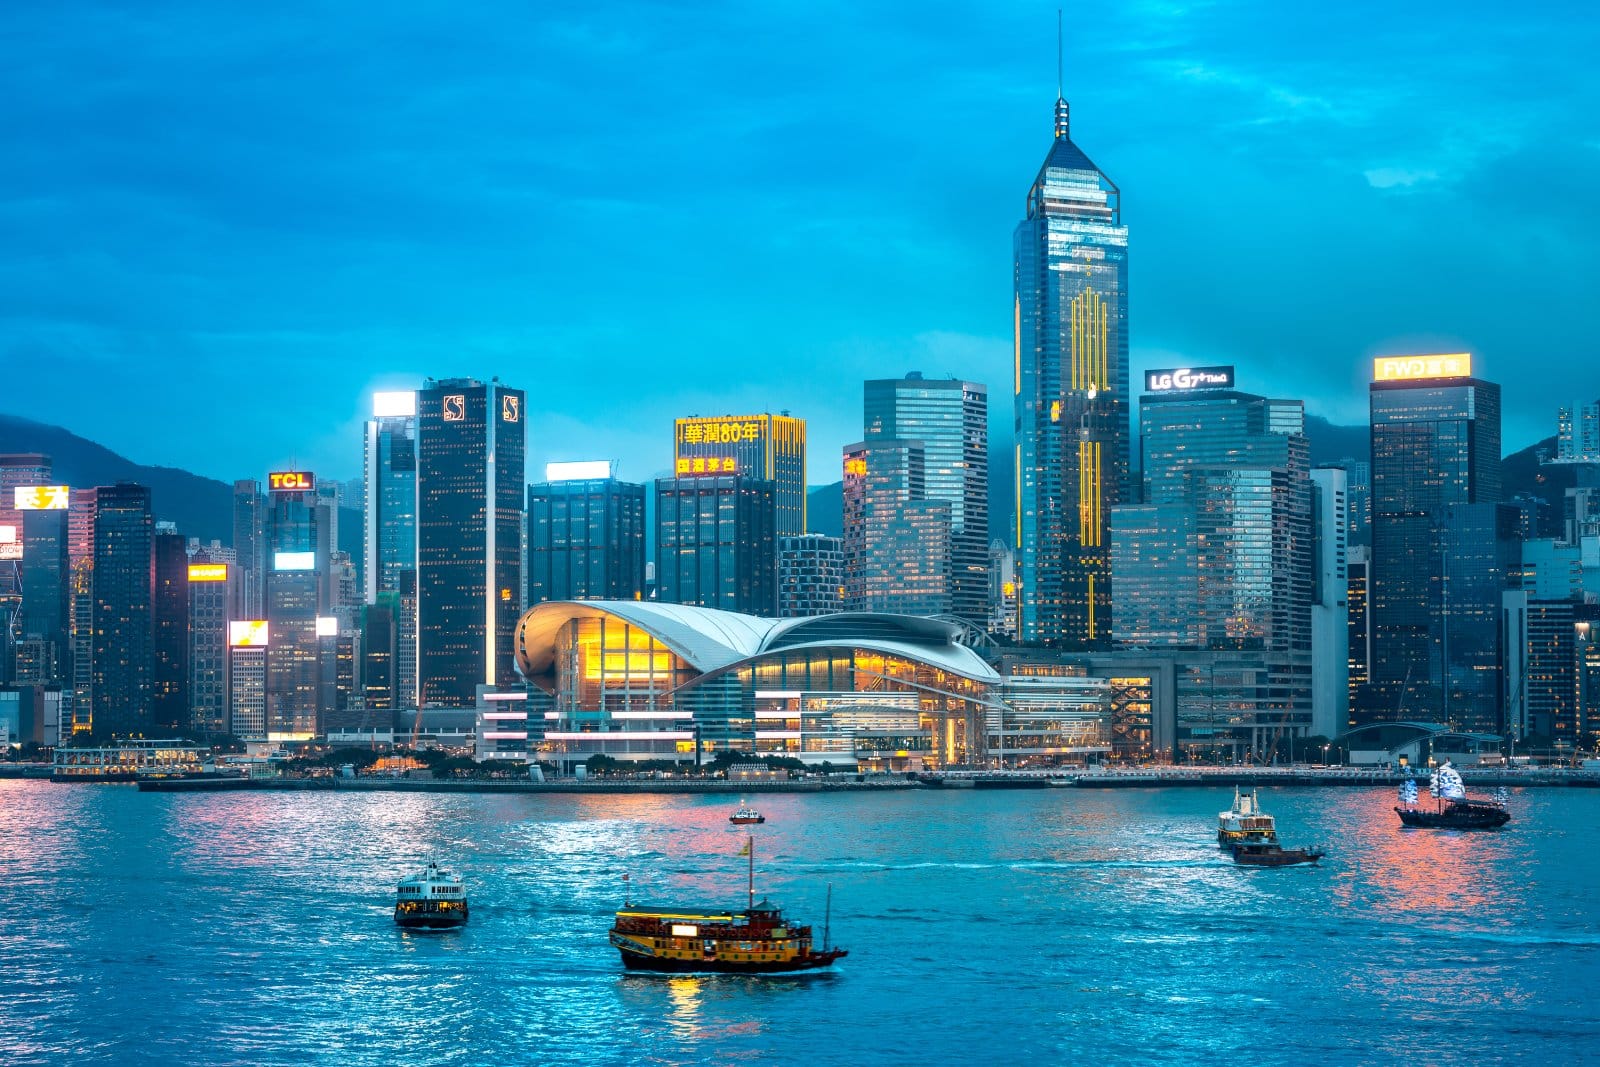 <p class="wp-caption-text">Image Credit: Shutterstock / YIUCHEUNG</p>  <p>A fusion of East and West, where the cost of lodging, eating, and shopping in this vertical city can reach towering heights.</p>